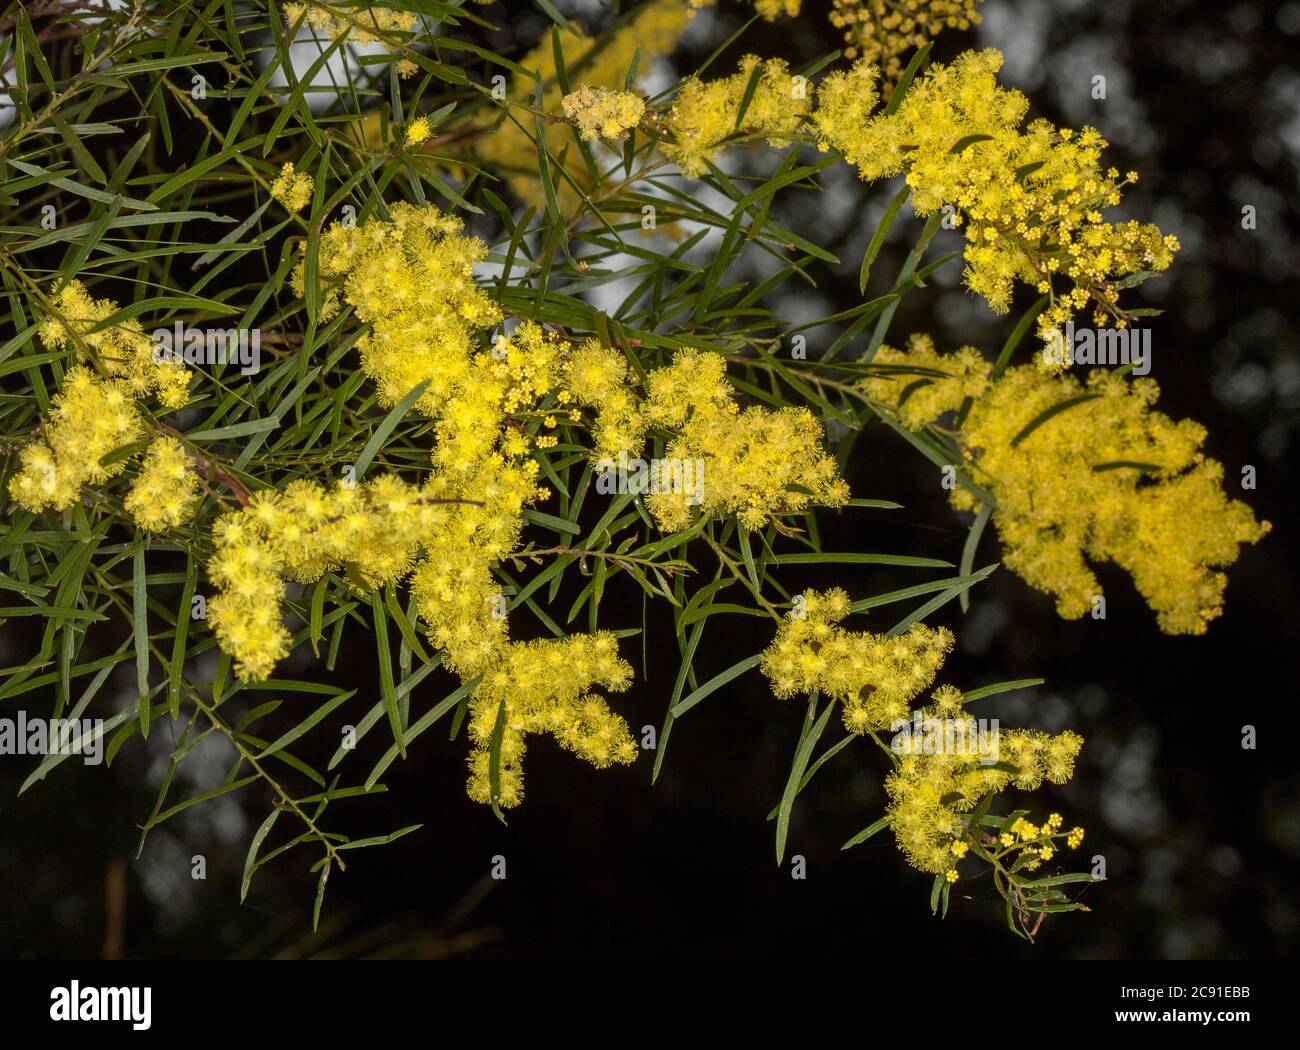 Clusters of bright yellow flowers and foliage of drought tolerant evergreen native plant Acacia fimbriata, Brisbane Wattle, Australian wildflowers Stock Photo